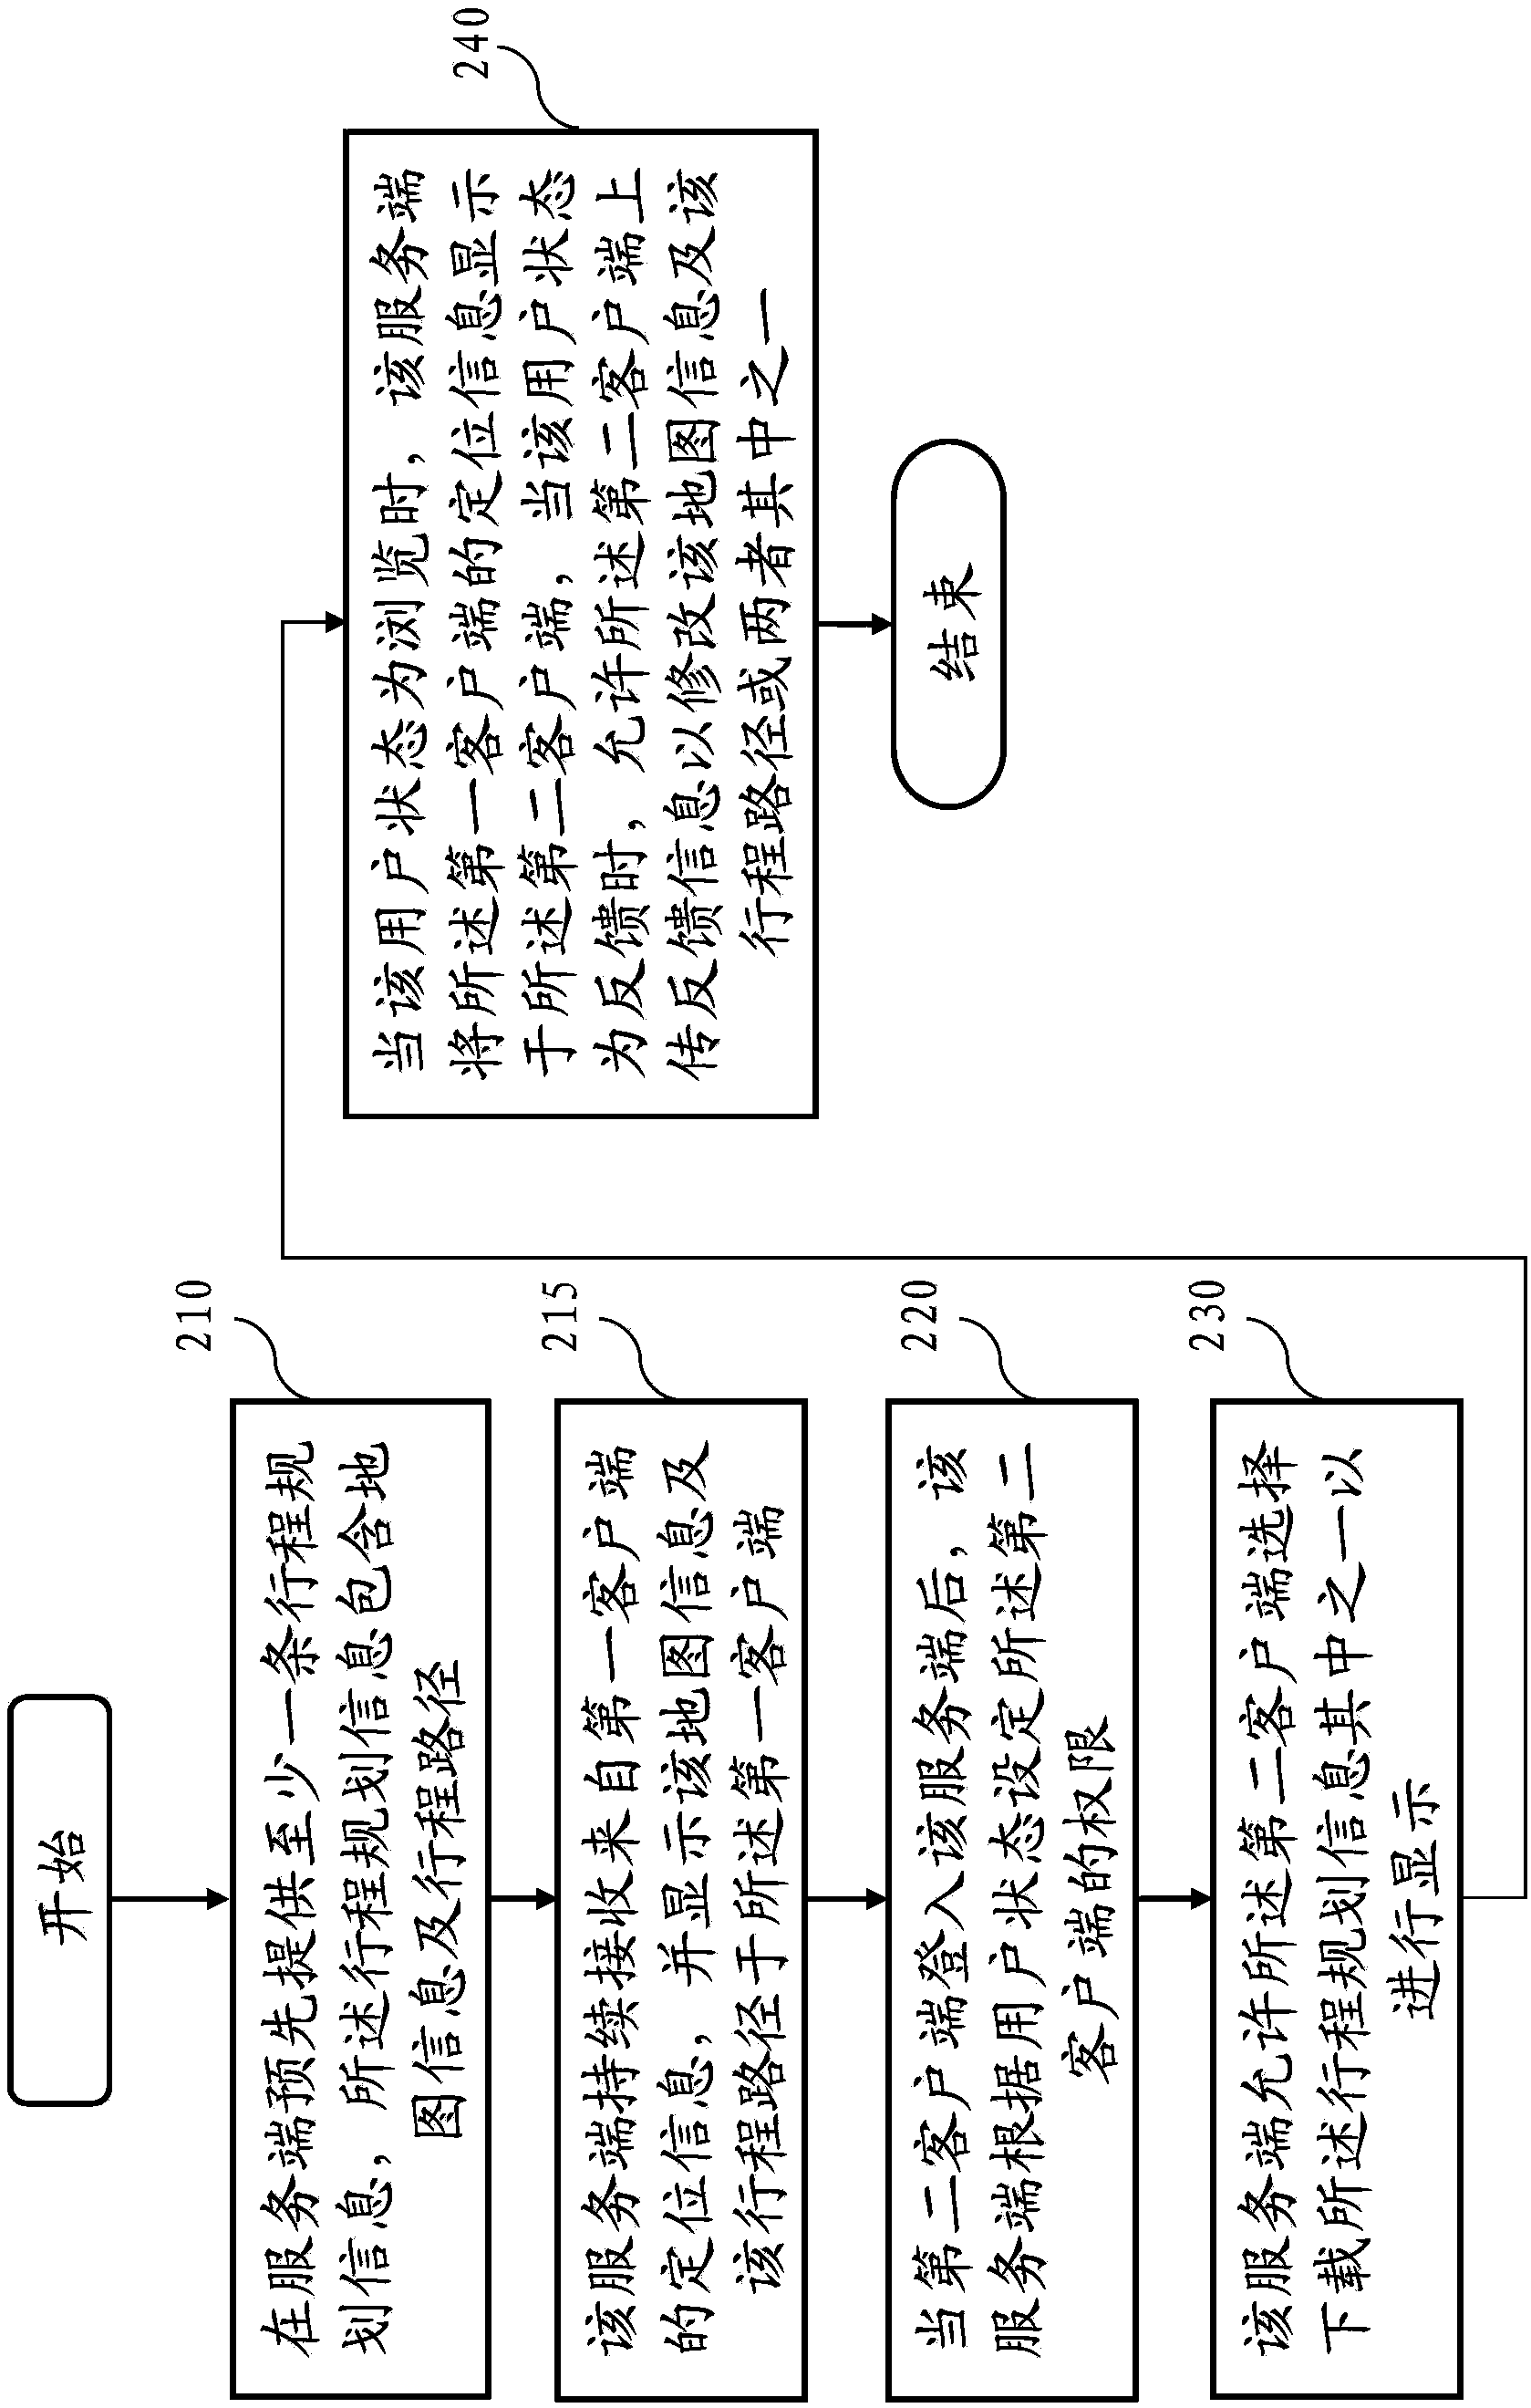 Travel route planning system based on Cloud and method of travel route planning system